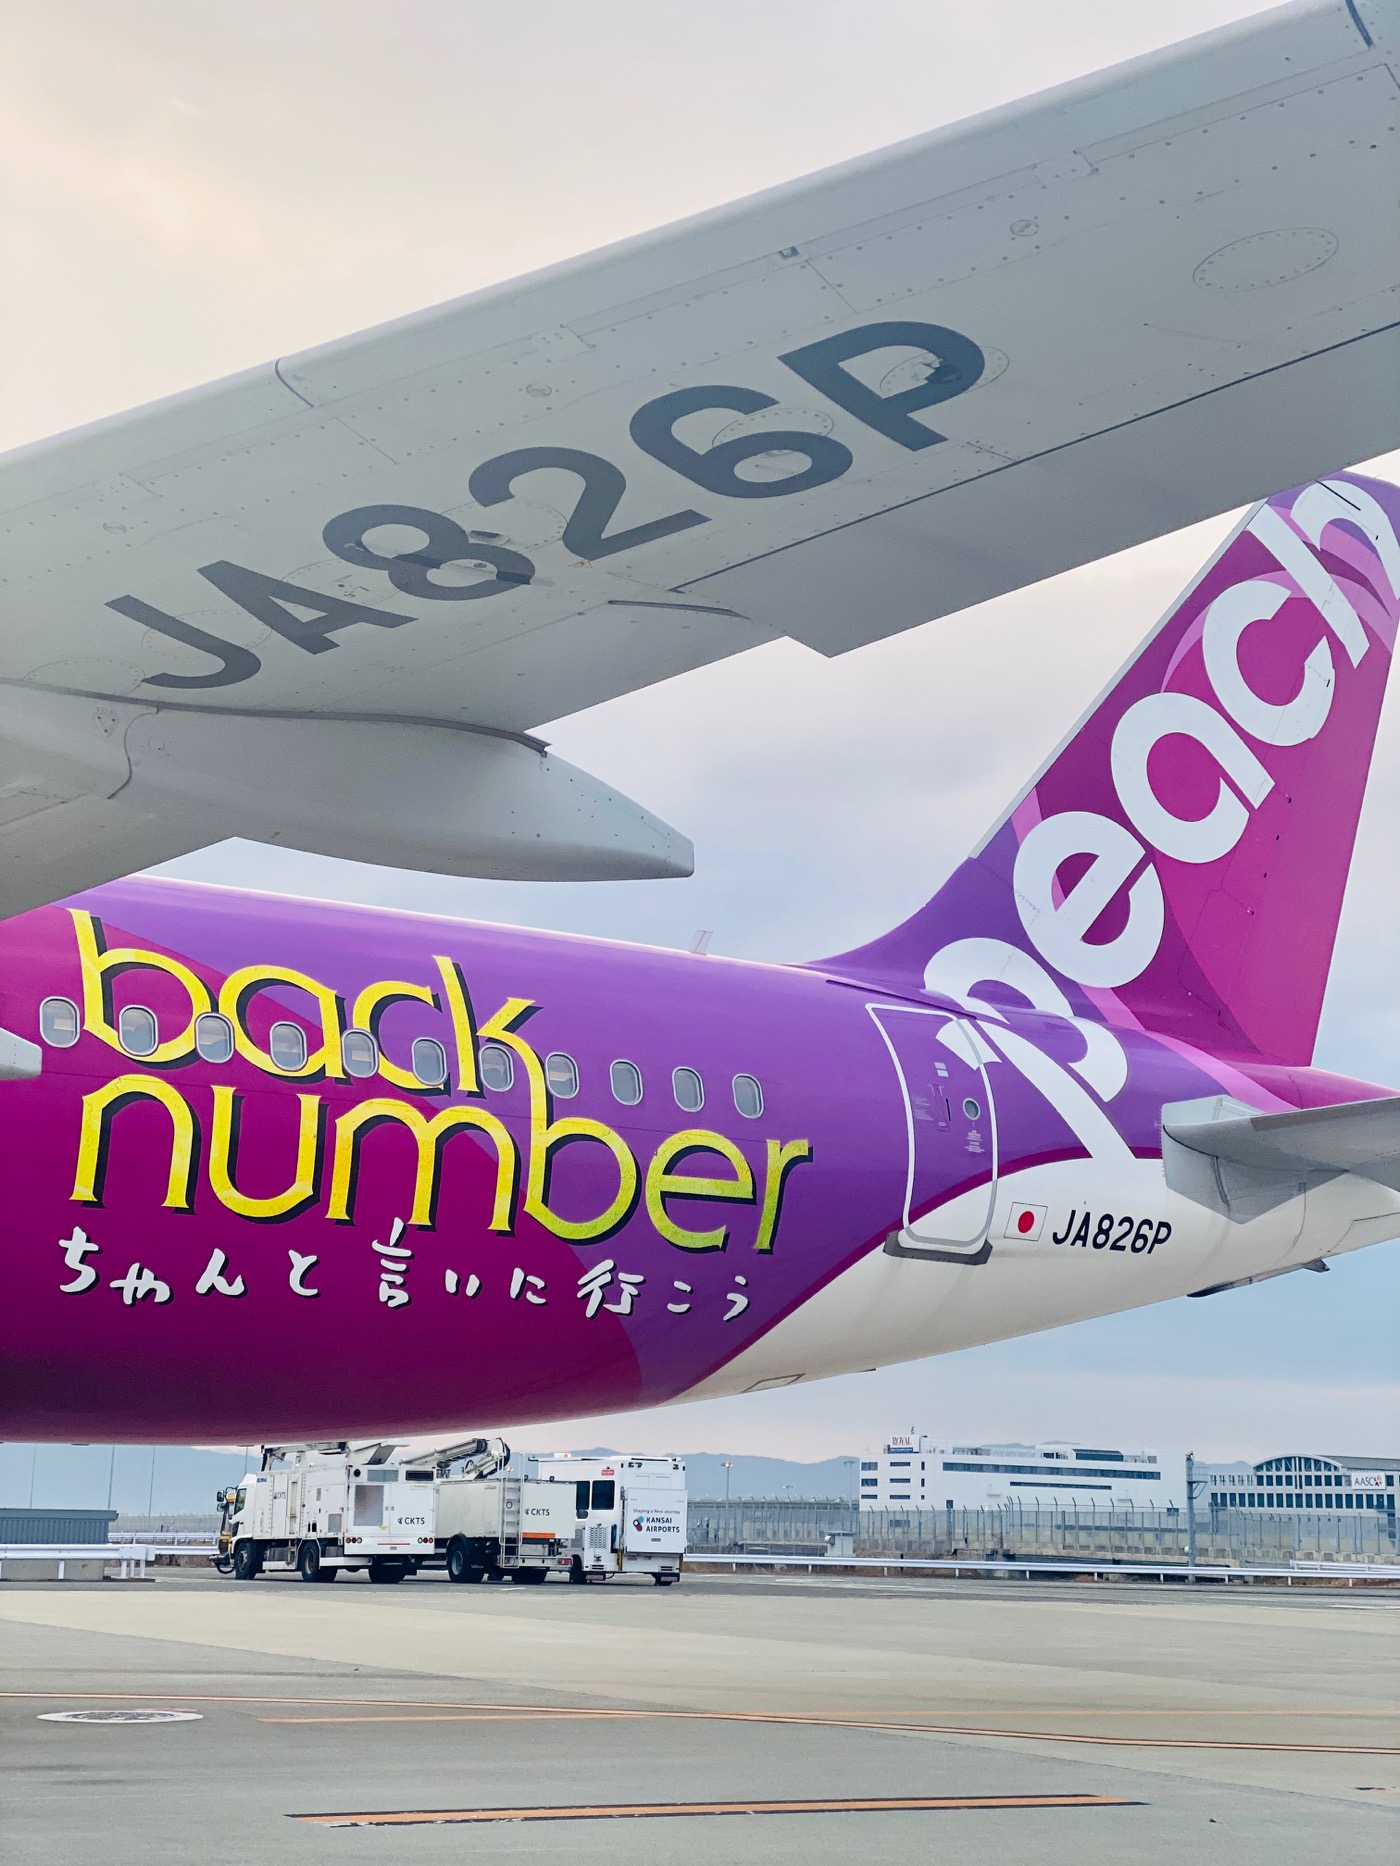 back number、航空会社Peachとコラボ！ back numberジェットが運航開始